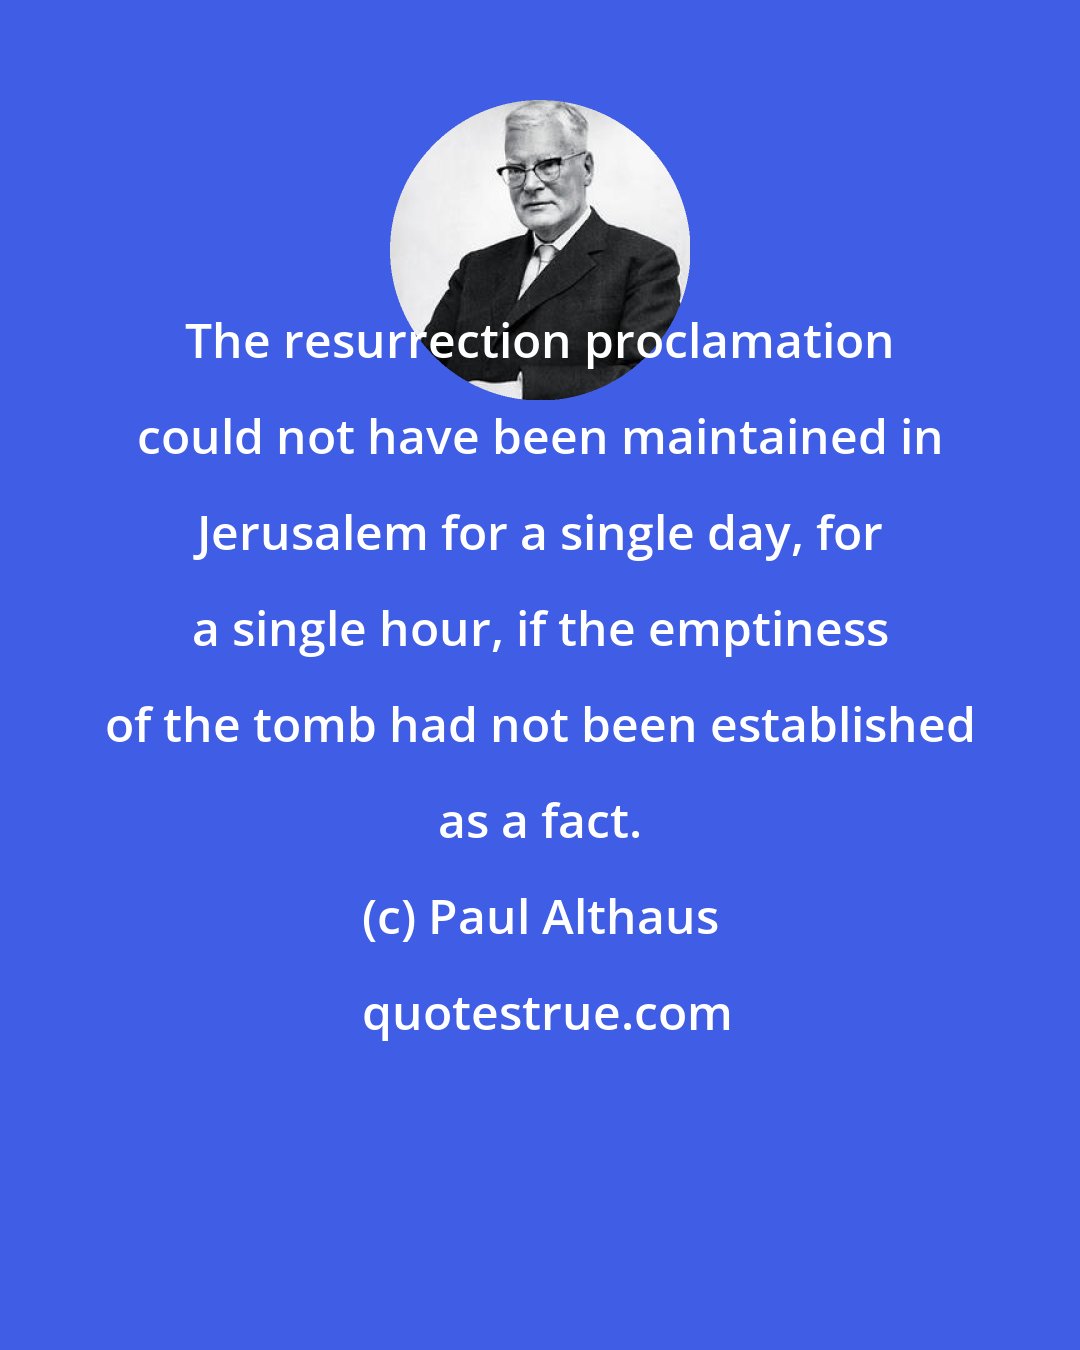 Paul Althaus: The resurrection proclamation could not have been maintained in Jerusalem for a single day, for a single hour, if the emptiness of the tomb had not been established as a fact.